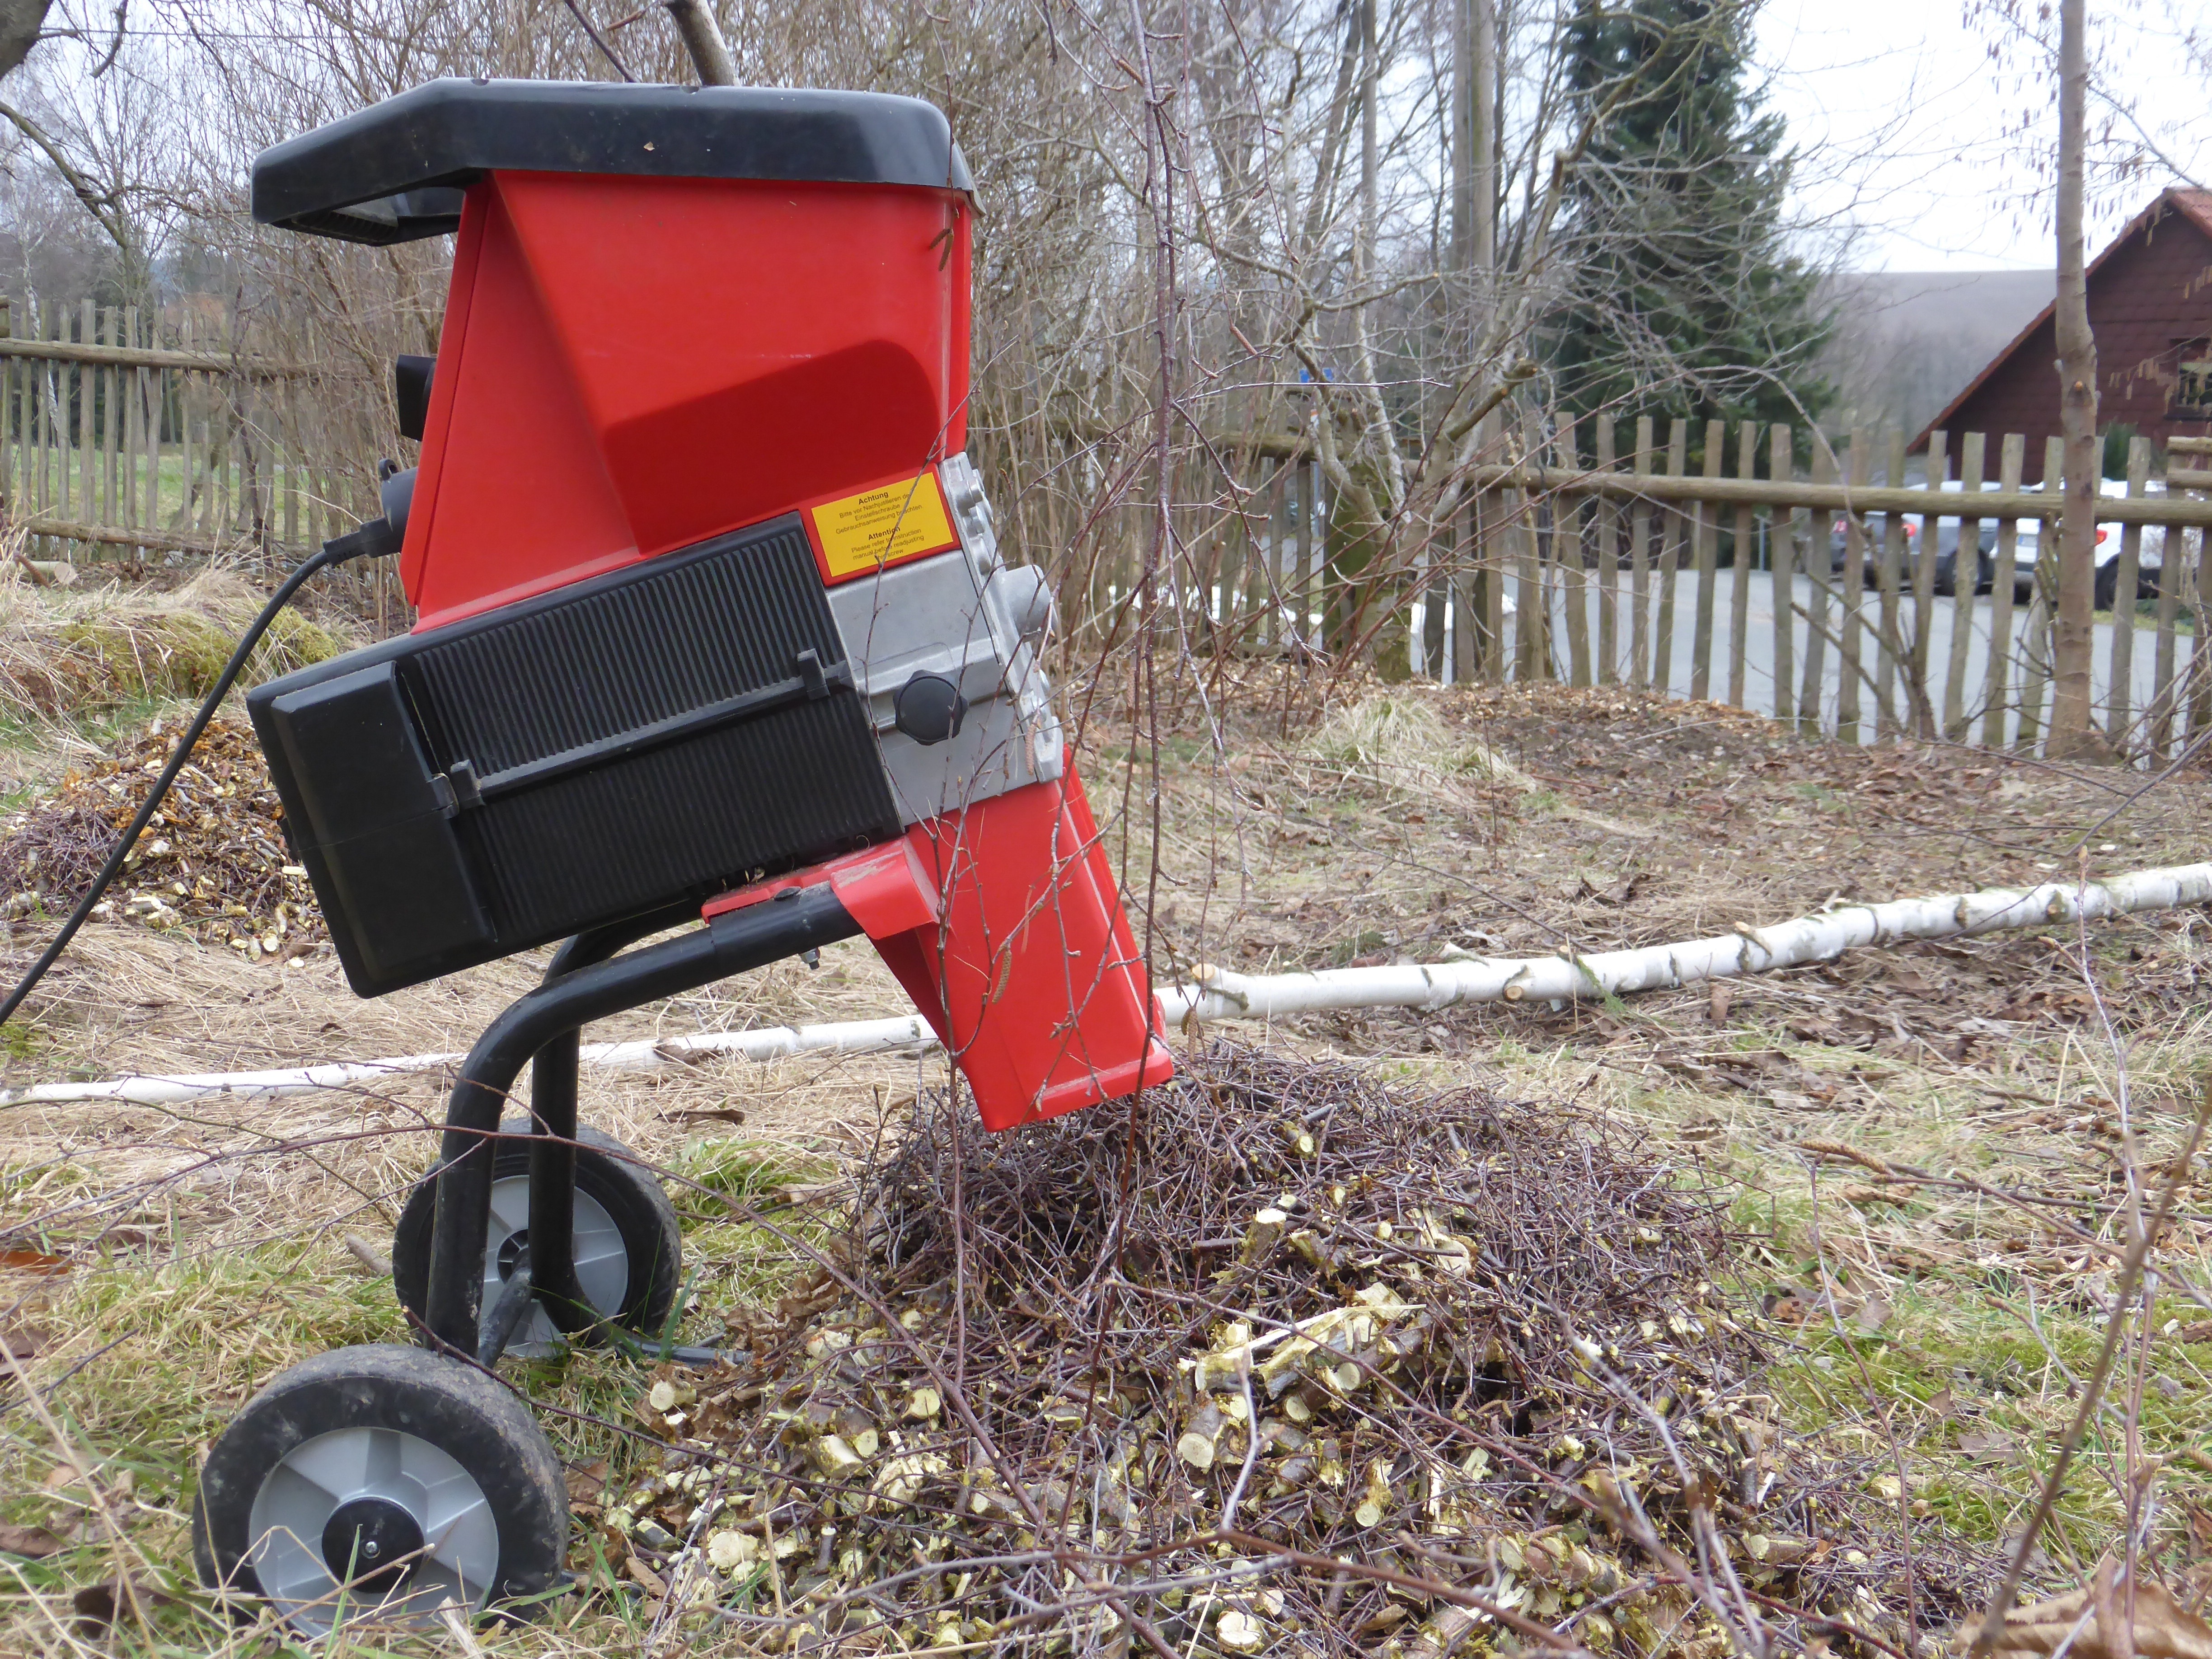 red and black corded machine near wooden fence during daytime